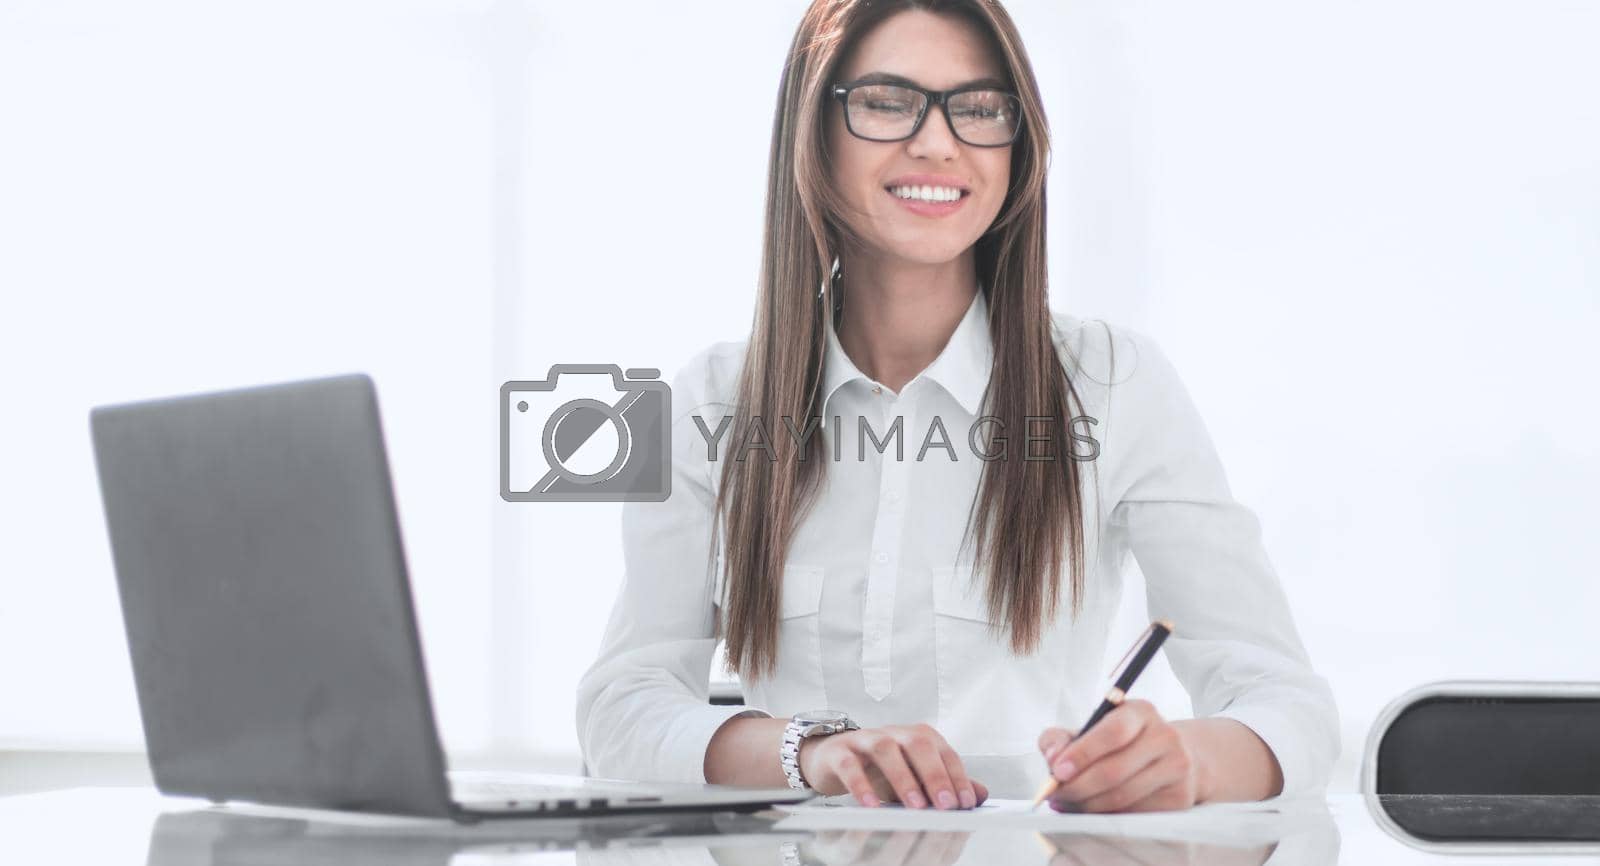 Royalty free image of responsible business woman working with documents by asdf